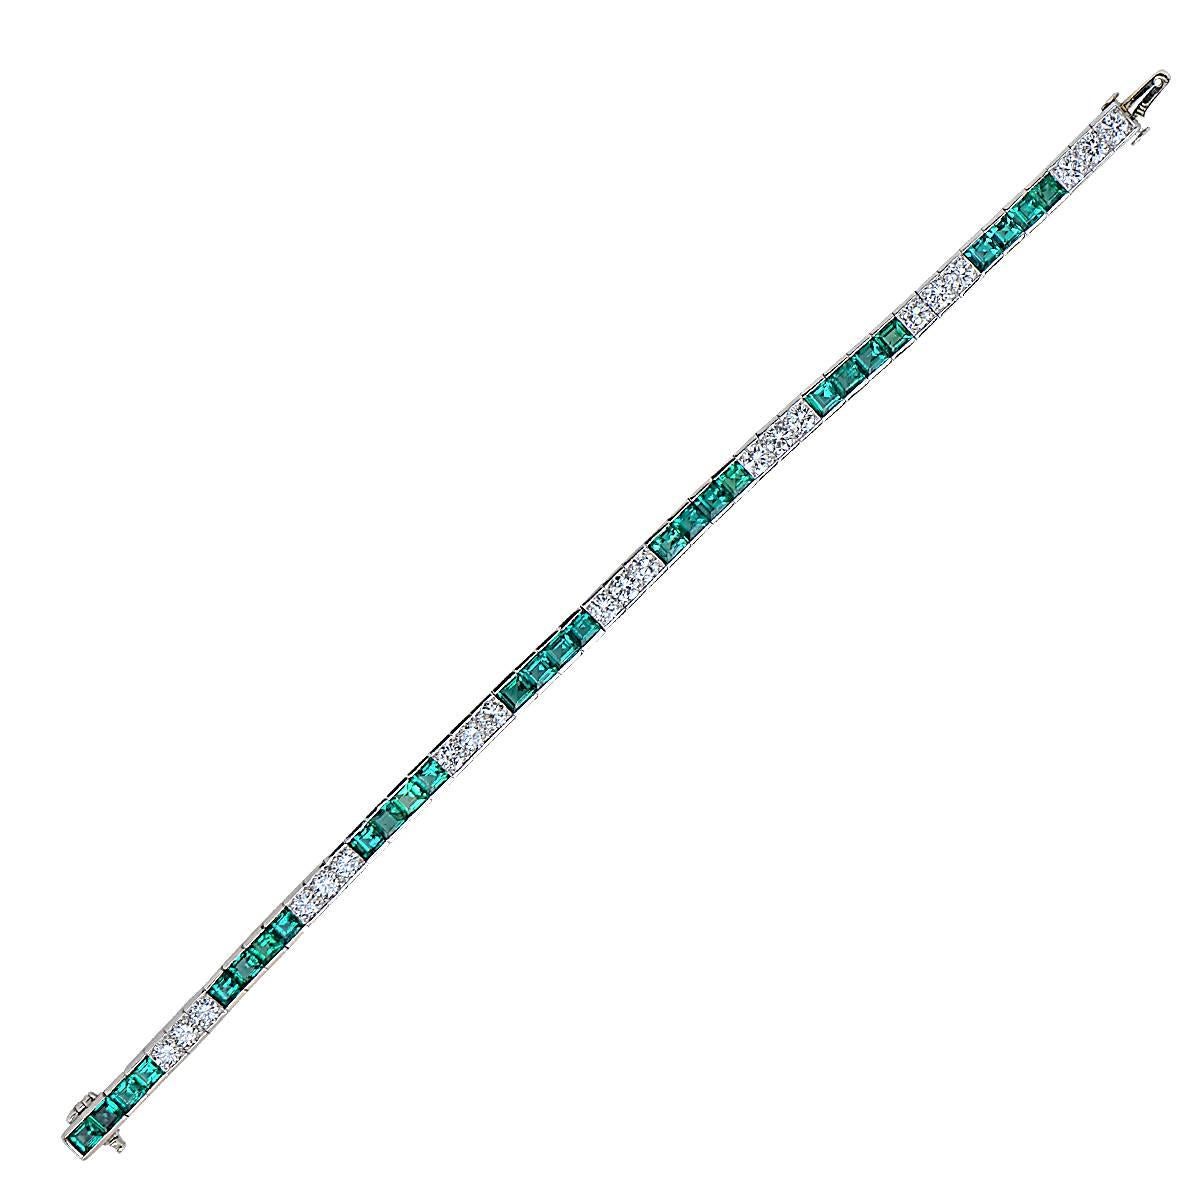 This elegant platinum Tiffany & Co. bracelet features 28 square emeralds weighing 6.06cts and 21 round brilliant cut diamonds weighing 2.89cts, F color, VS clarity.

The bracelet measures 7 inches in length.
It is stamped and tested as